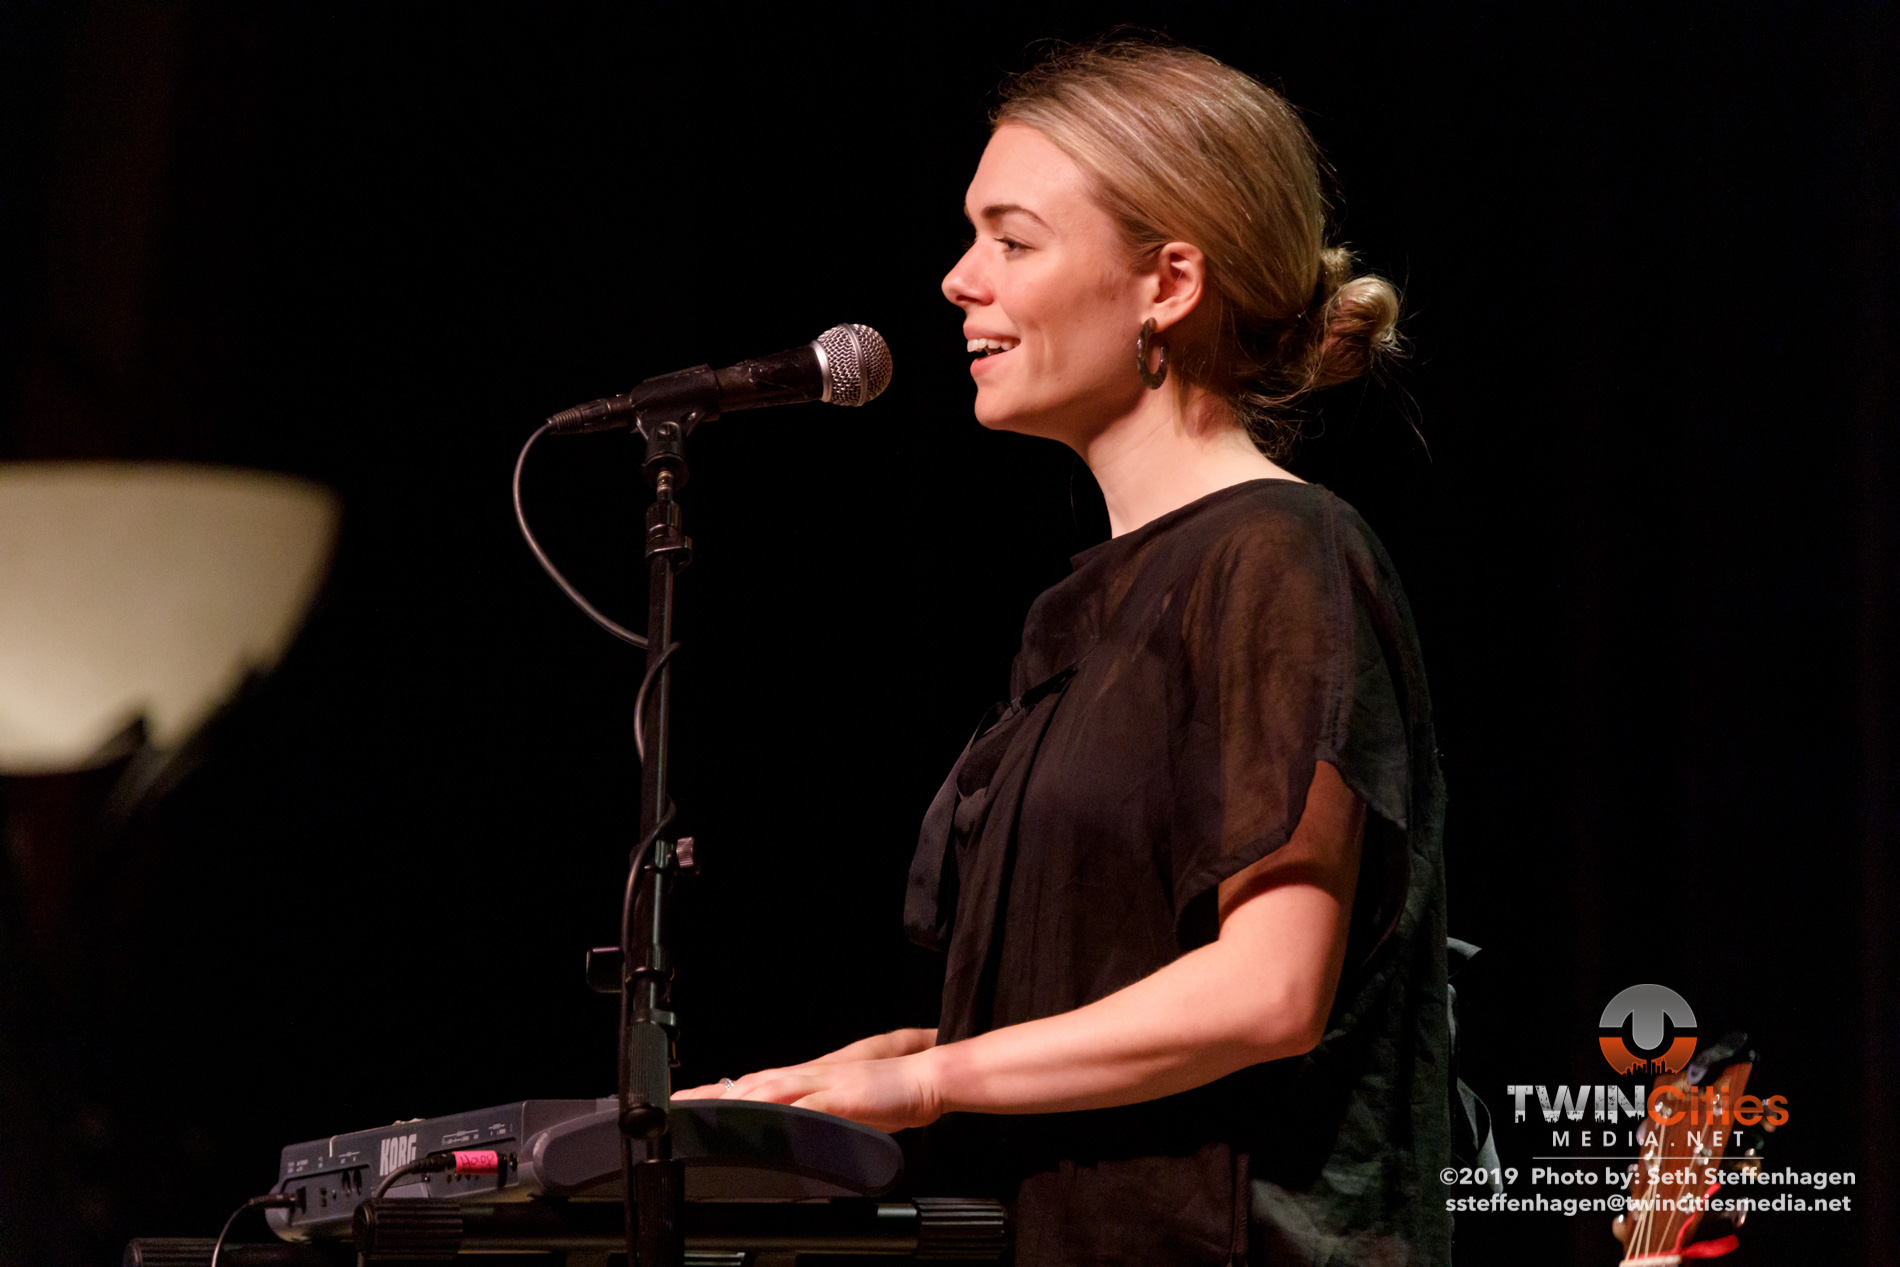 November 15, 2019 - Minneapolis, Minnesota, United States - Jesca Hoop live in concert at The Cedar Cultural Center along with Chloe Foy as the opener.(Photo by Seth Steffenhagen/Steffenhagen Photography)